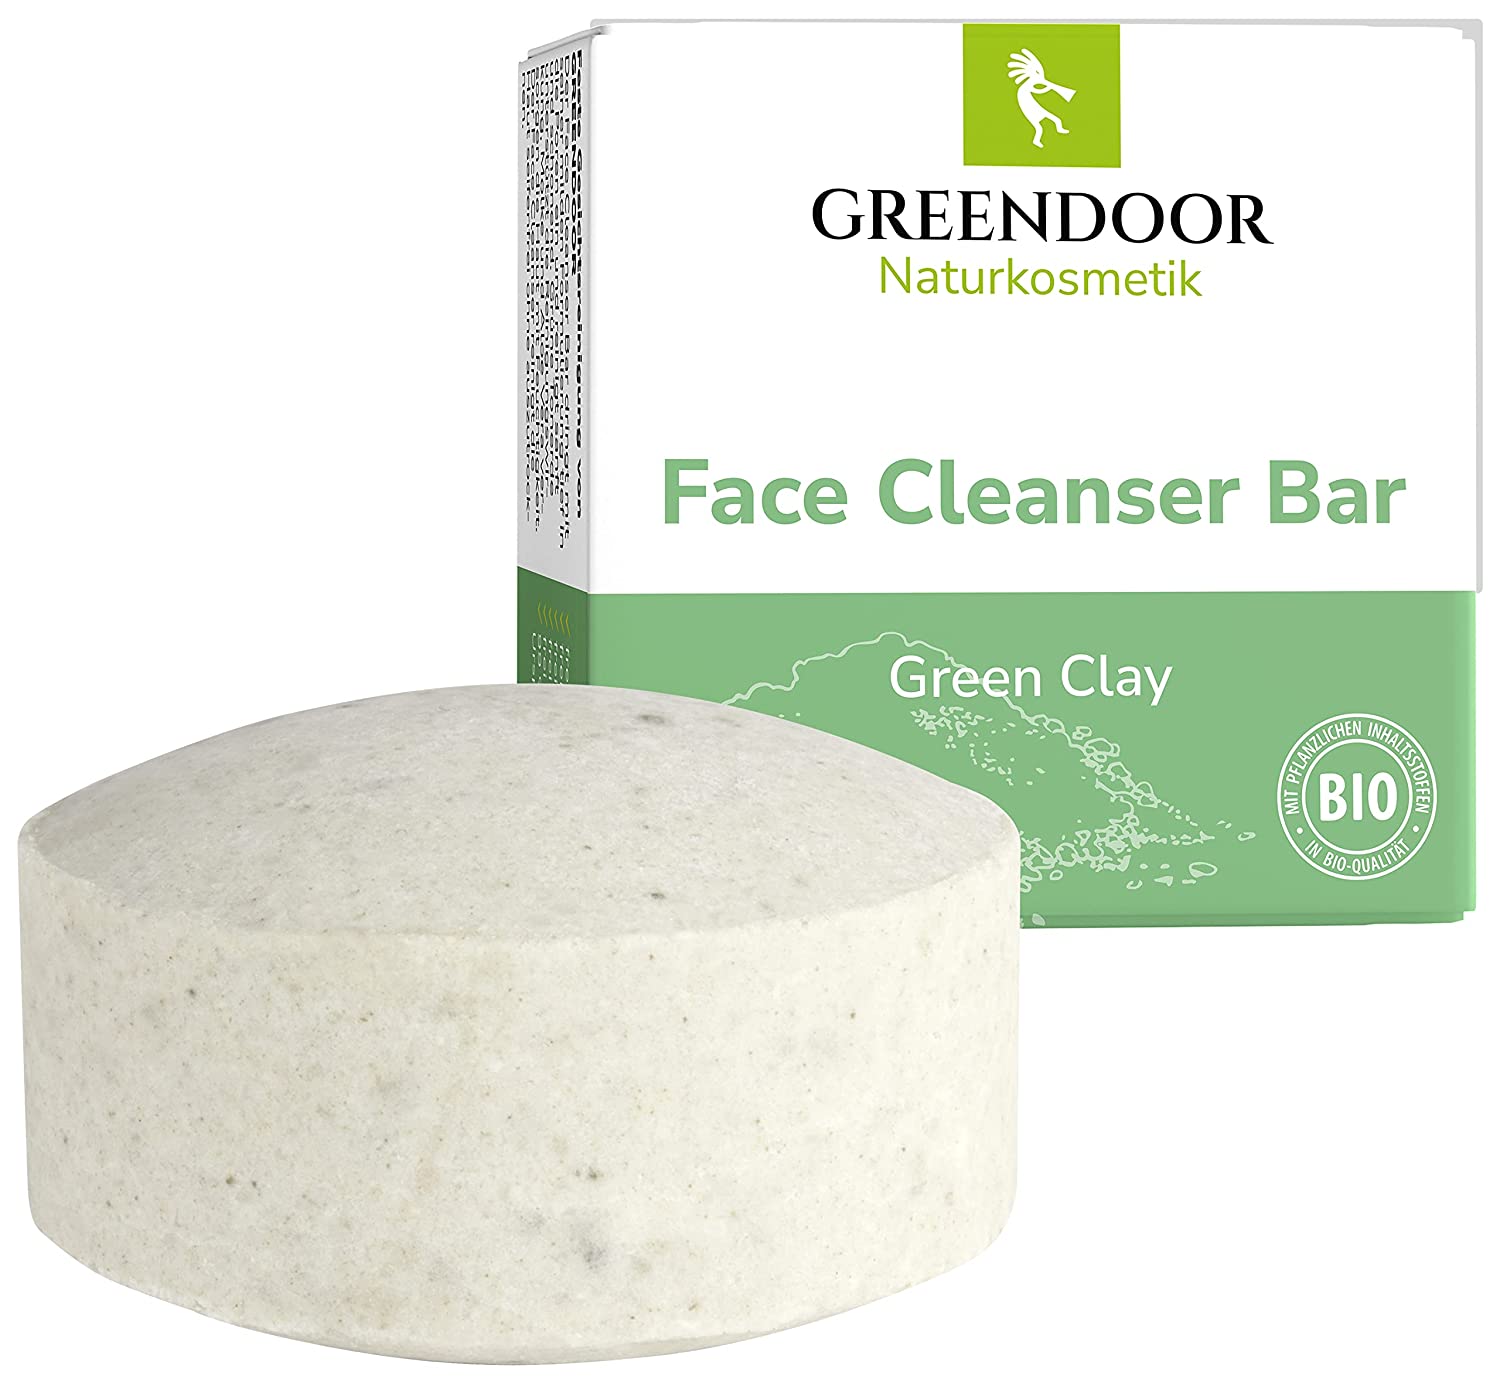 GREENDOOR Firm facial cleansing with clay for soap-free pure skin, 57 g, for dry/normal/sensitive skin, naturally plastic-free, with skin-nourishing aloe vera and organic sesame oil, unisex